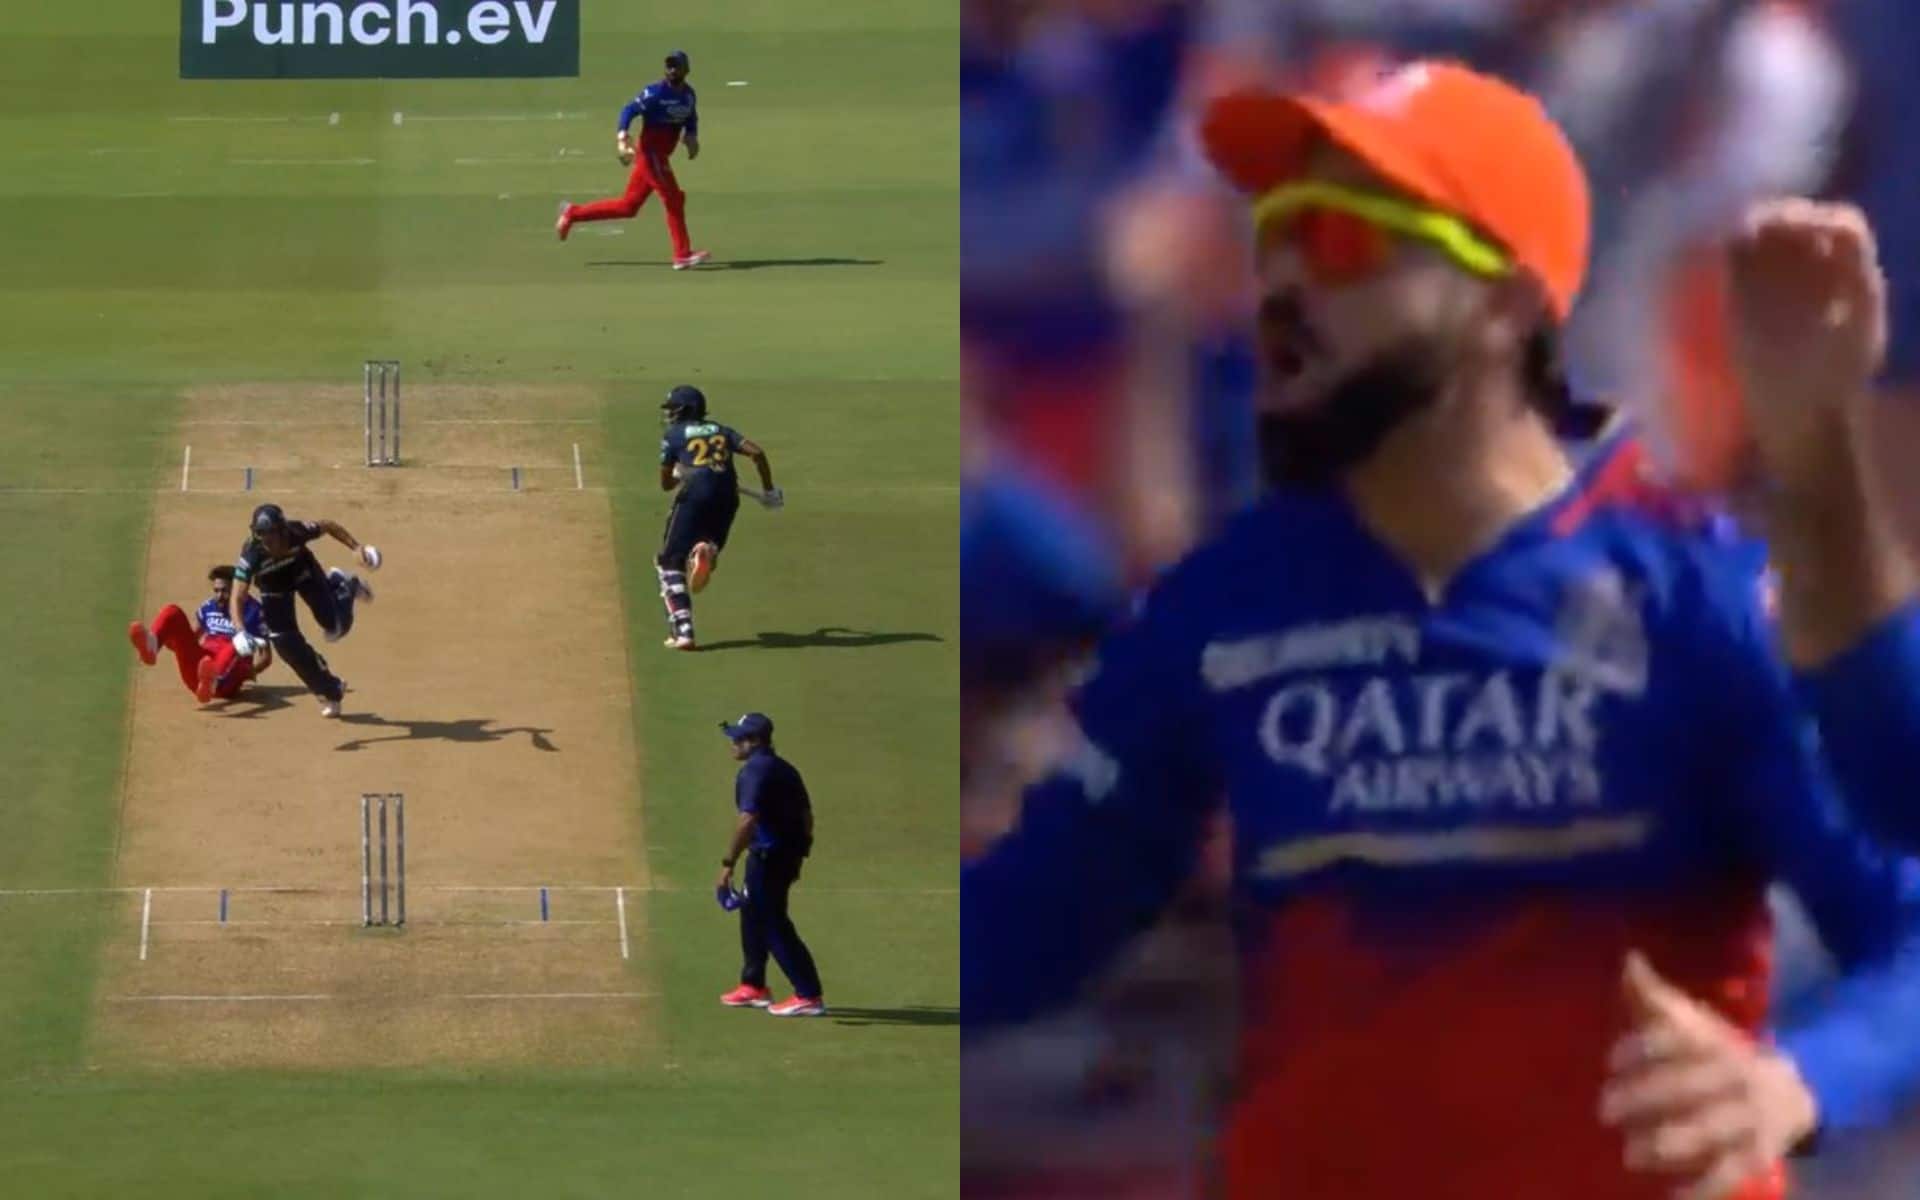 Kohli's reaction after missing a run out following Siraj-Gill collision (X.com)